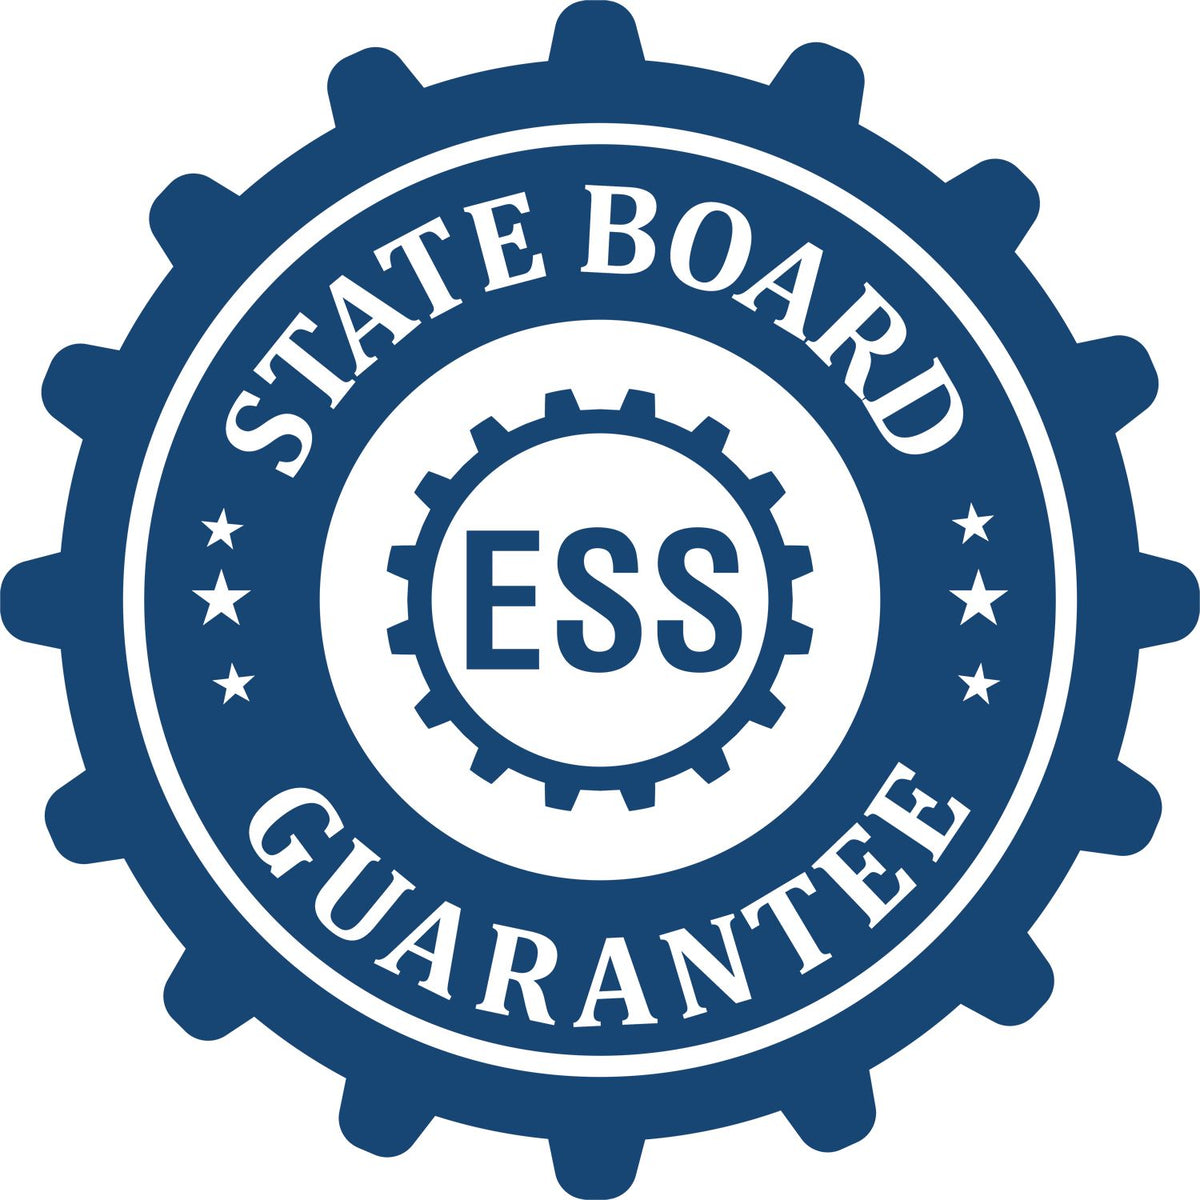 An emblem in a gear shape illustrating a state board guarantee for the State of Utah Extended Long Reach Engineer Seal product.